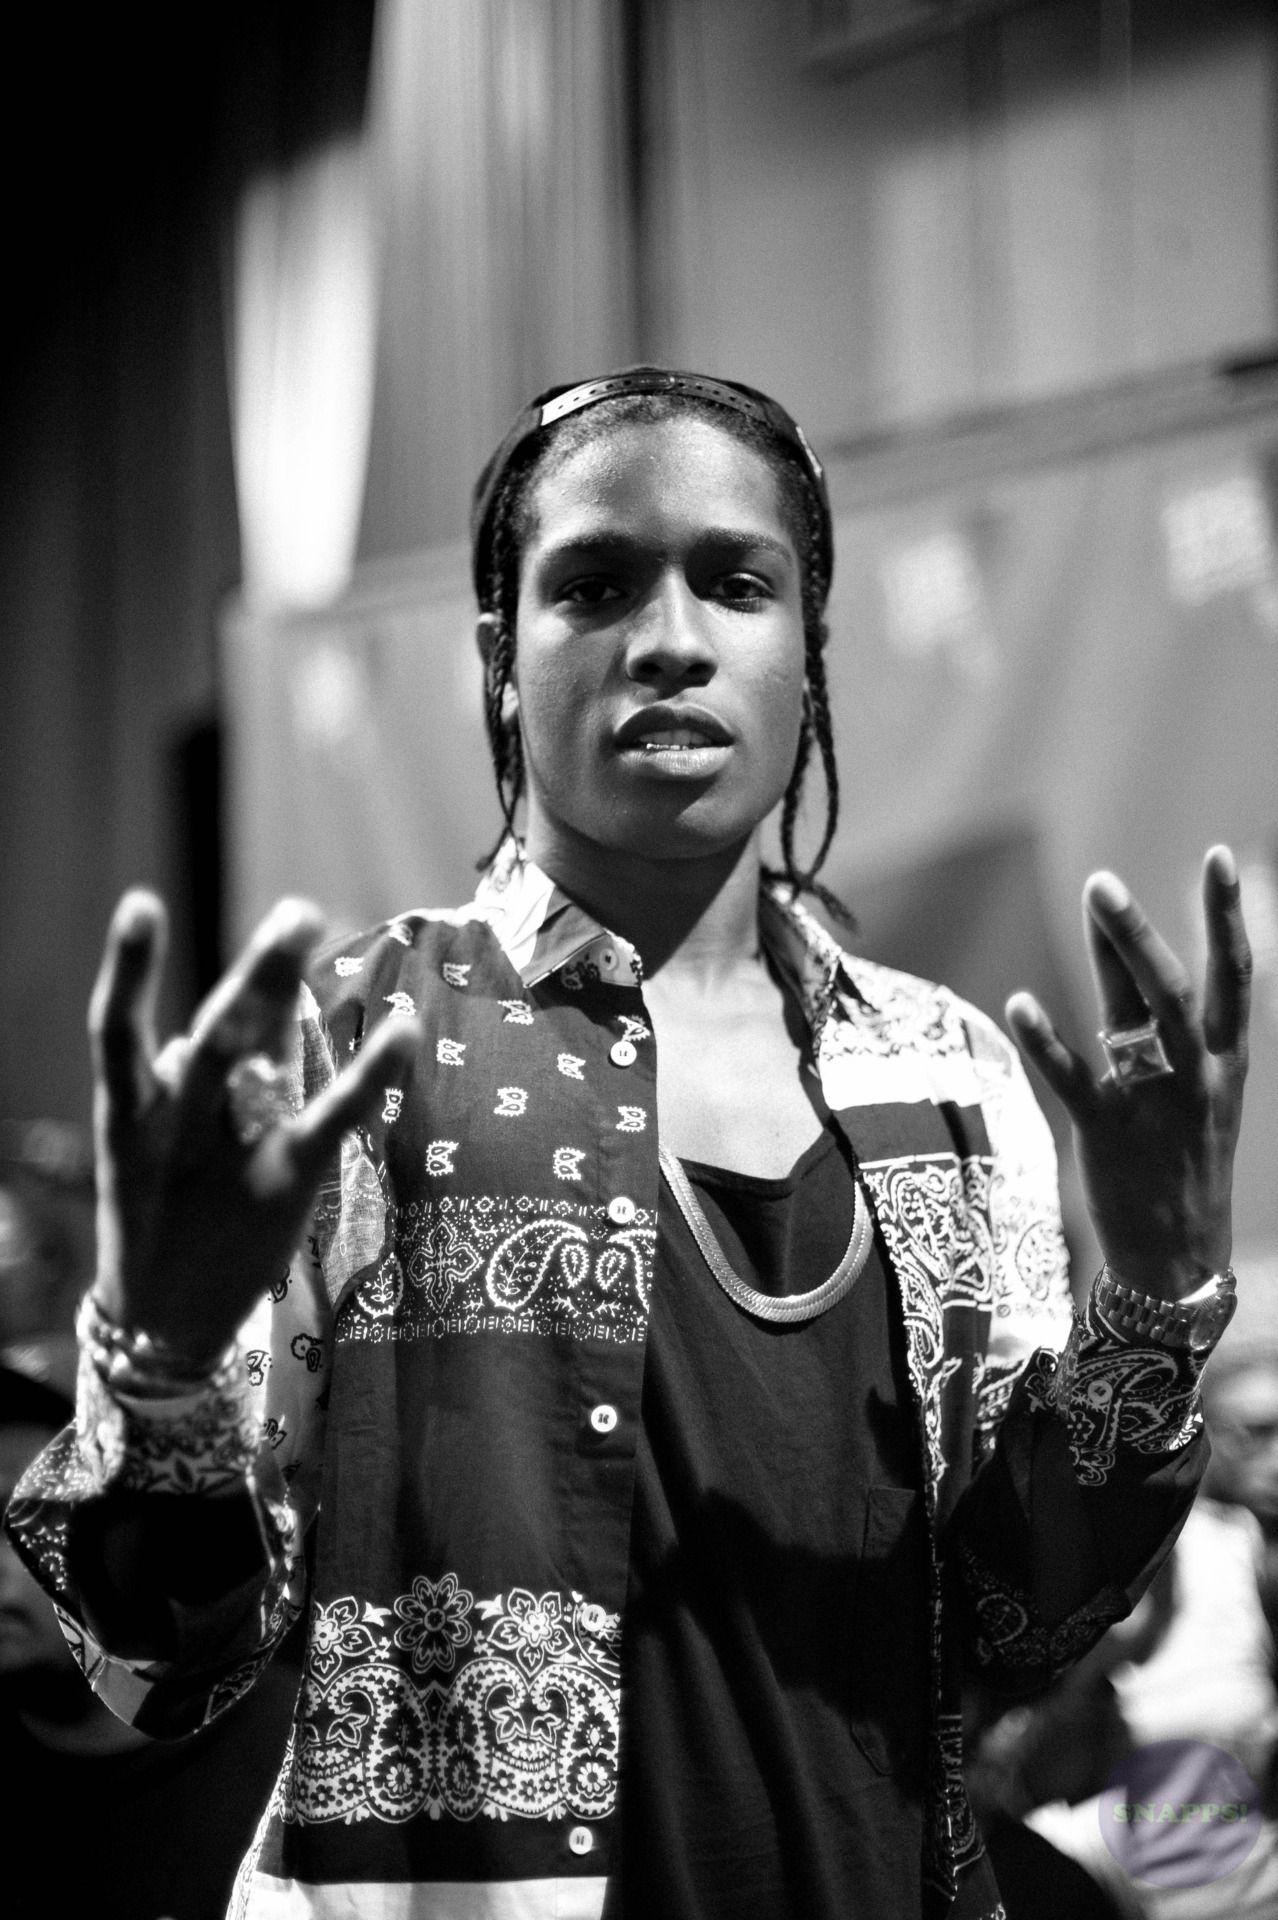 Asap Rocky Wallpaper for iPhone iPhone 7 plus, iPhone 6 plus